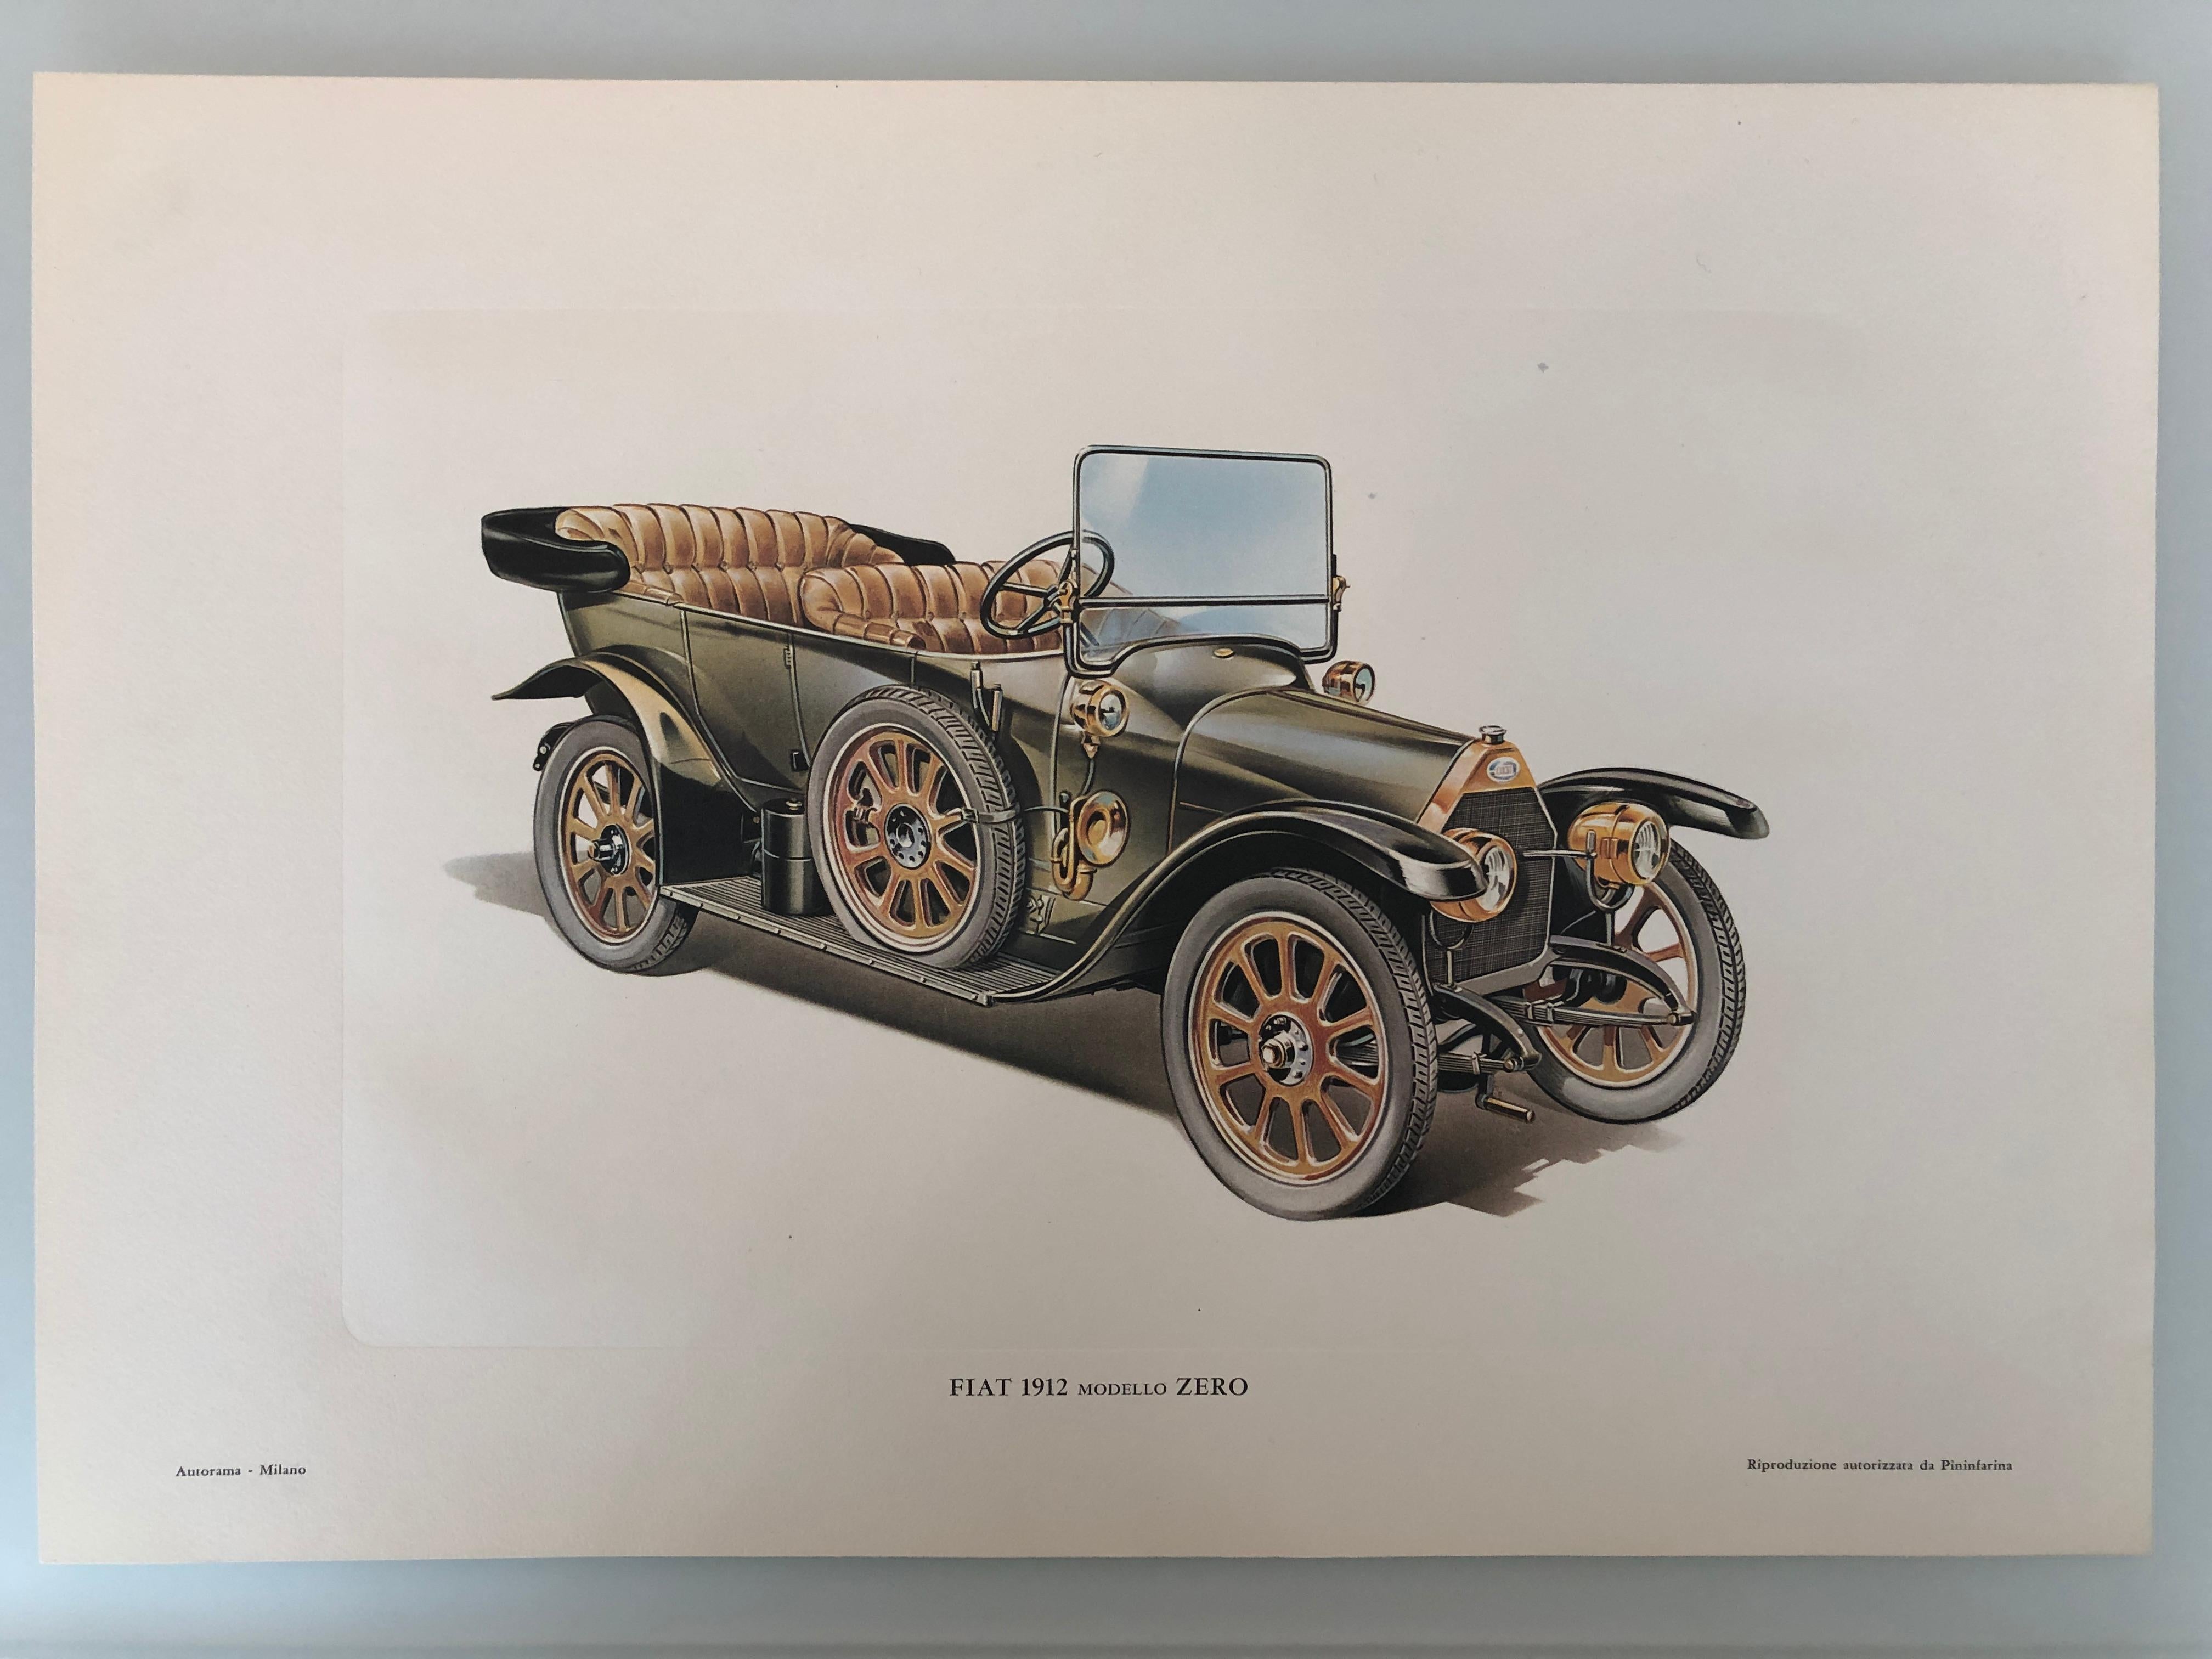 Mid XX century Pininfarina multi series lithography

We have many pieces with two subjects 
In here the lithography represents an Alfa Romeo 33 model published by Autorama 

We also have lithographies representing FIAT 912 model 0 cat

Size of each